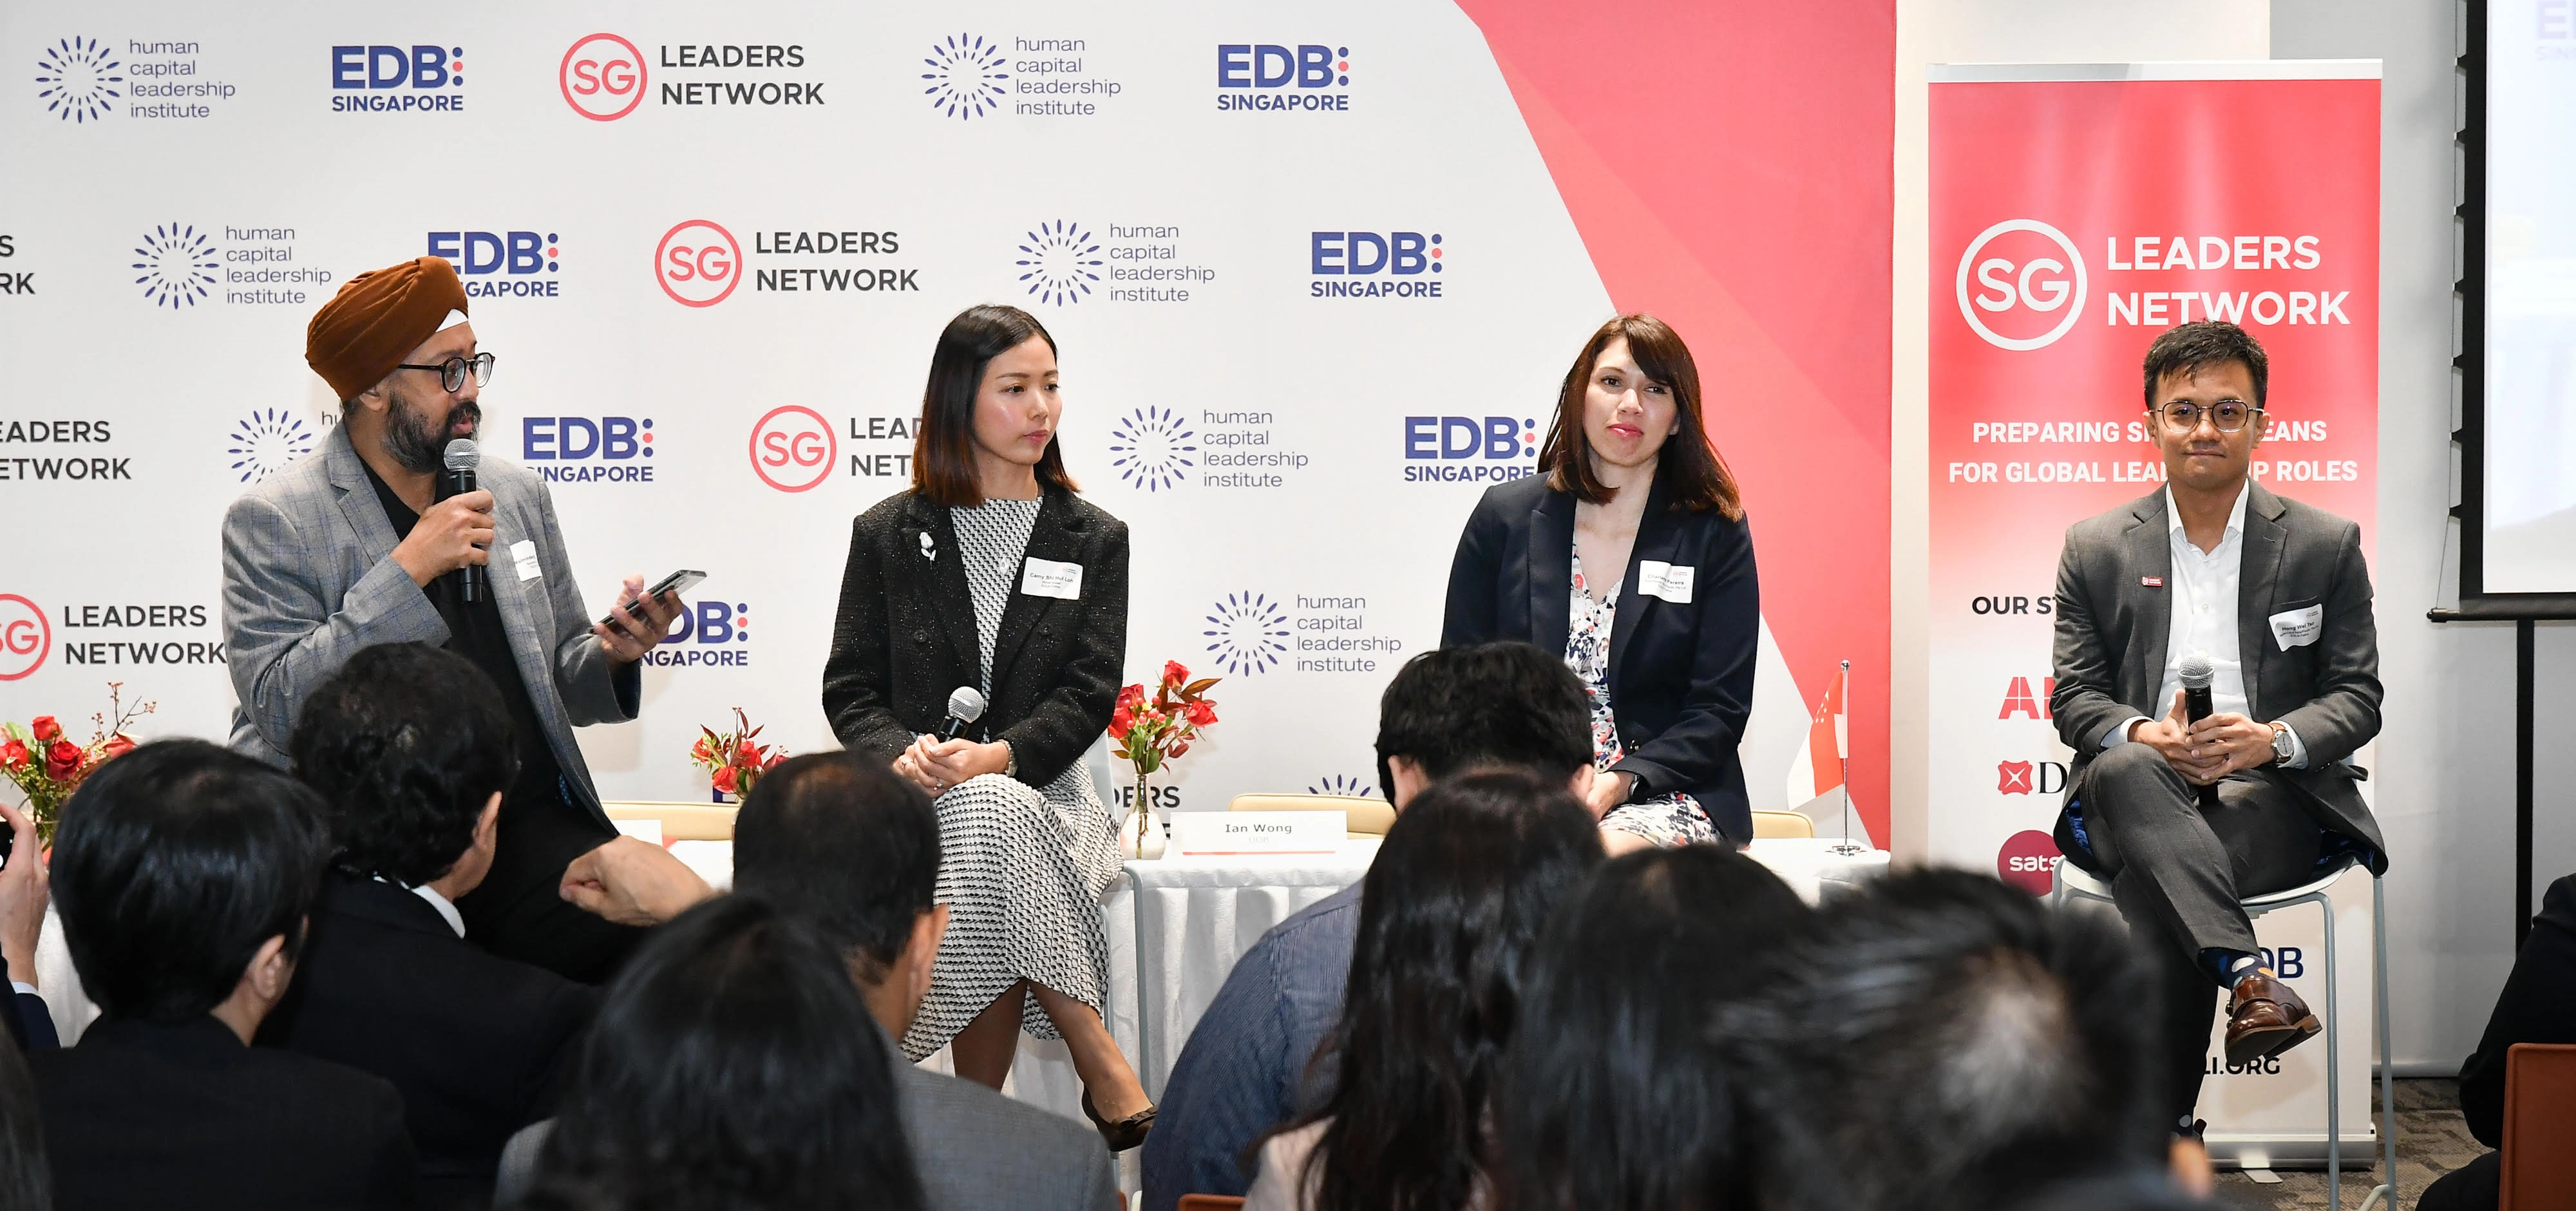 Singapore Leaders Network unveils a pipeline of future global business leaders